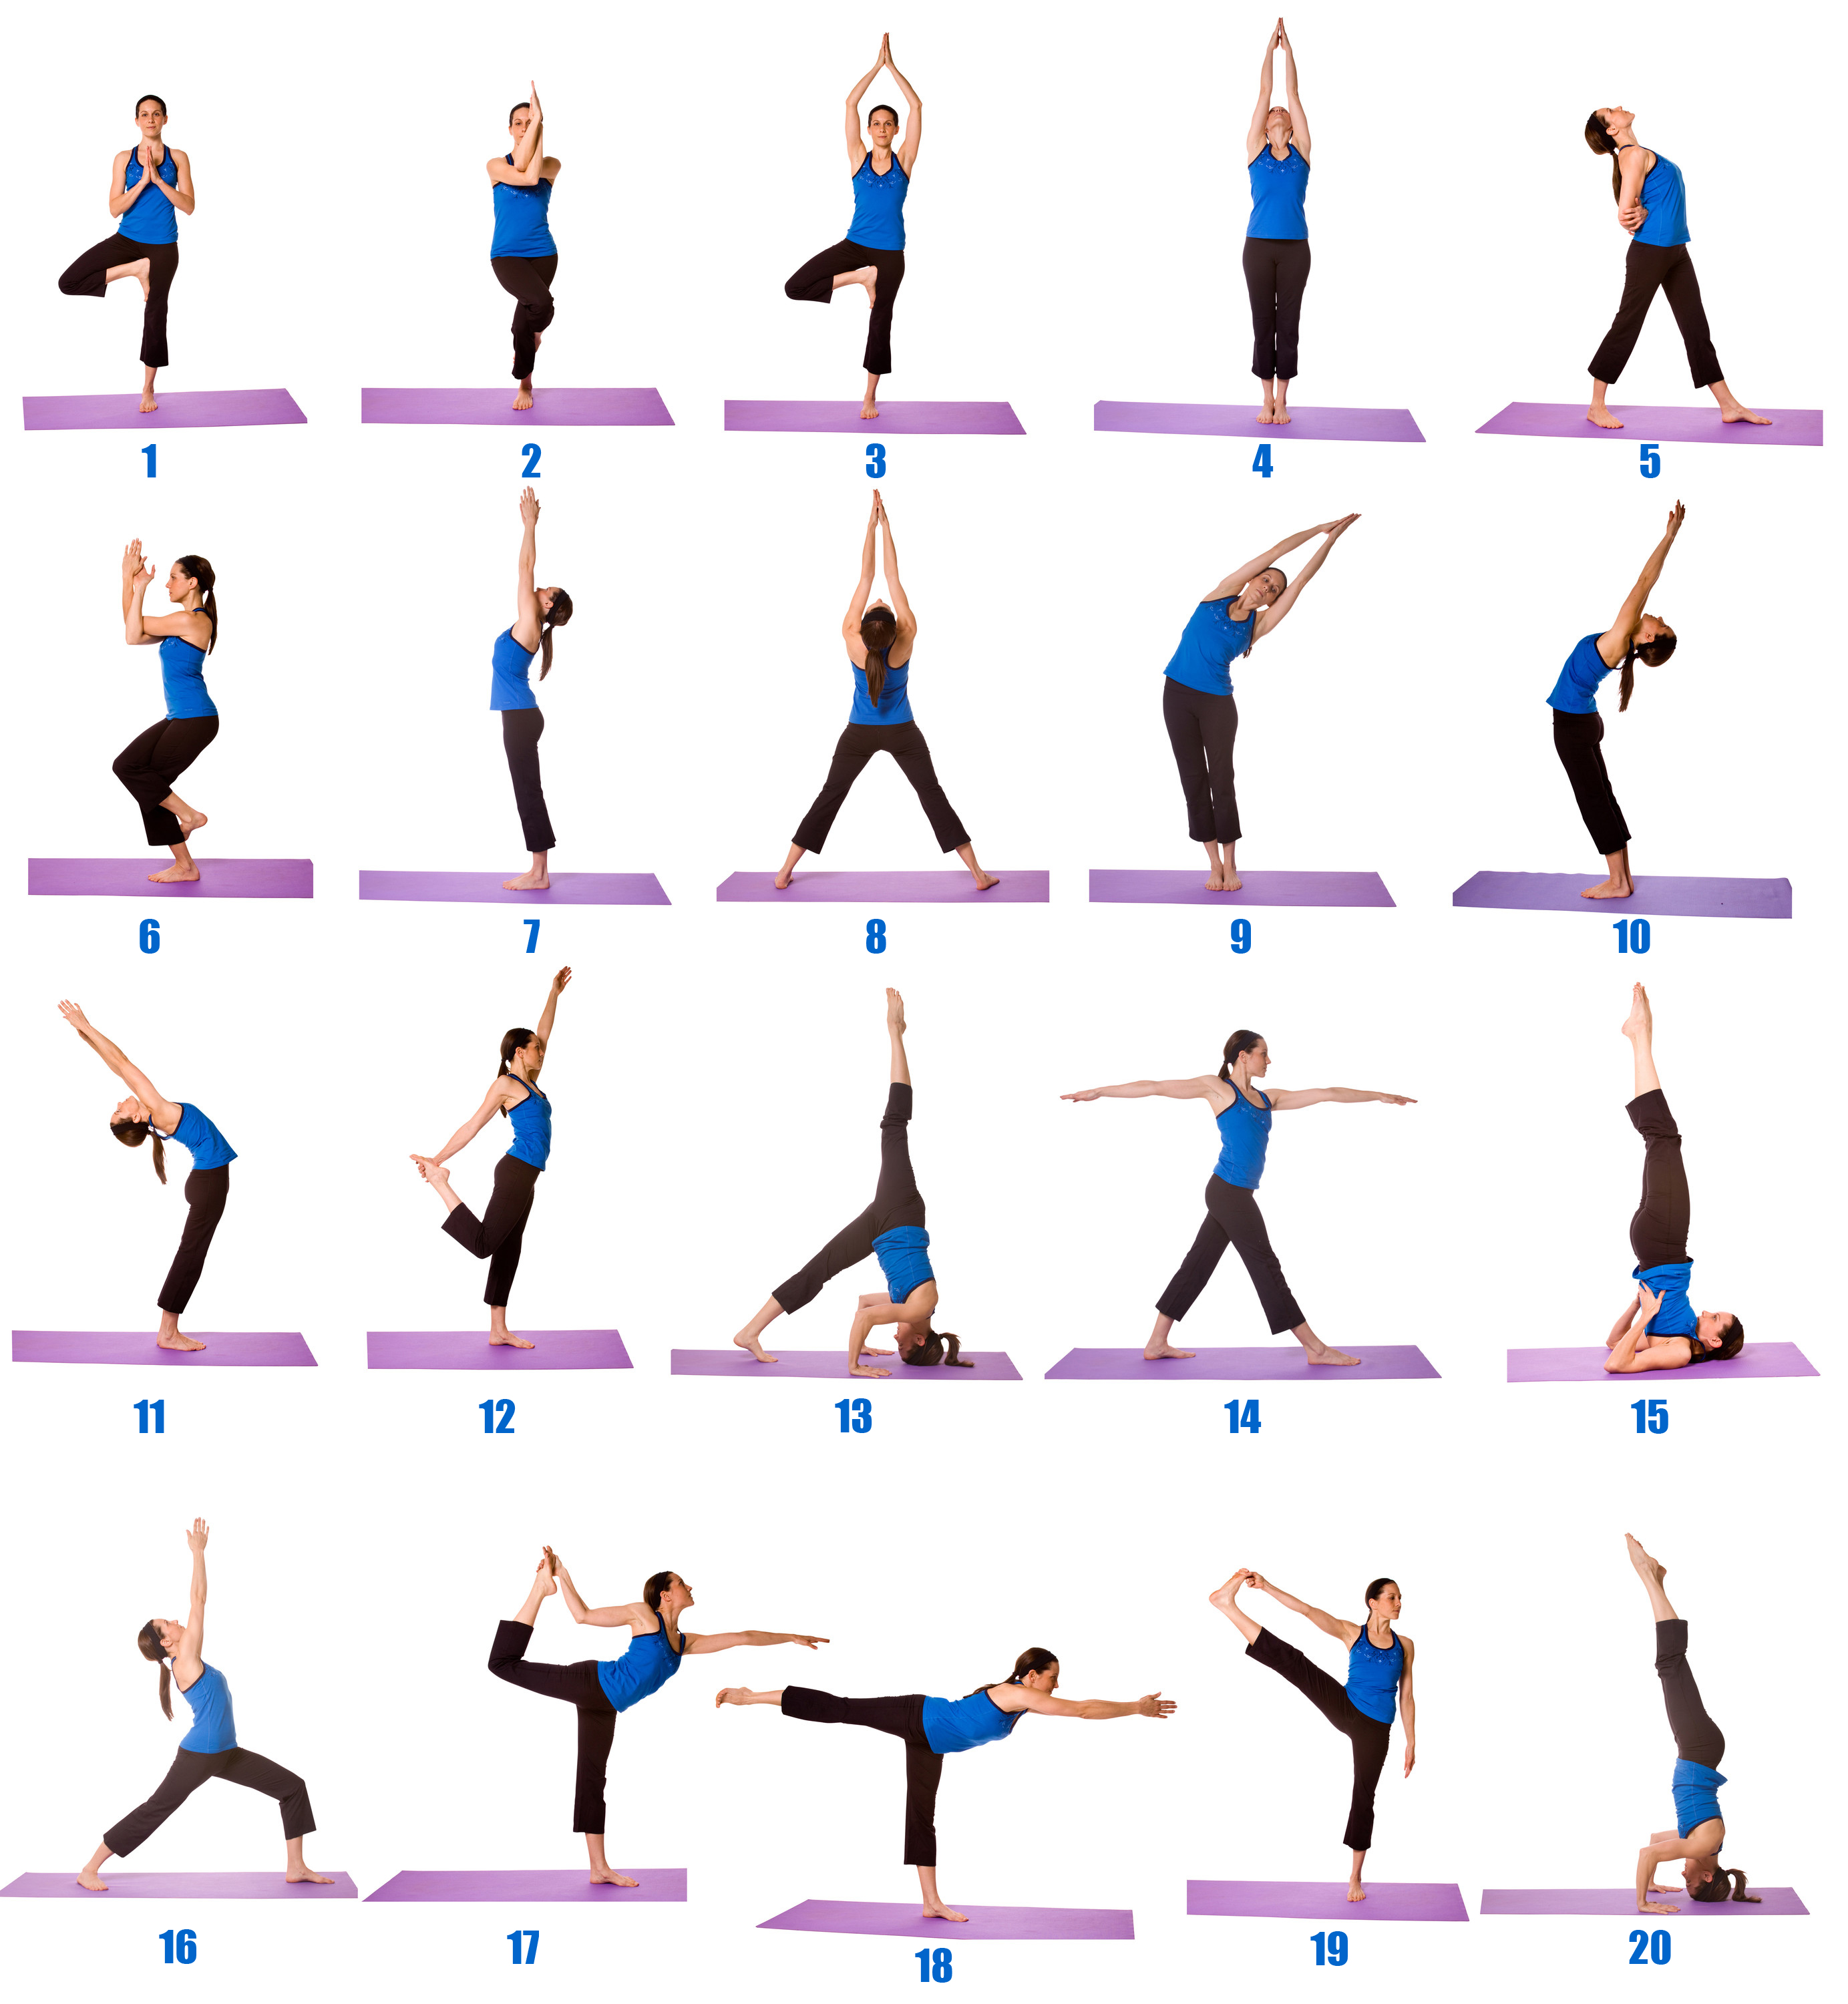 Yoga Poses For Beginners Pictures - Work Out Picture Media - Work Out